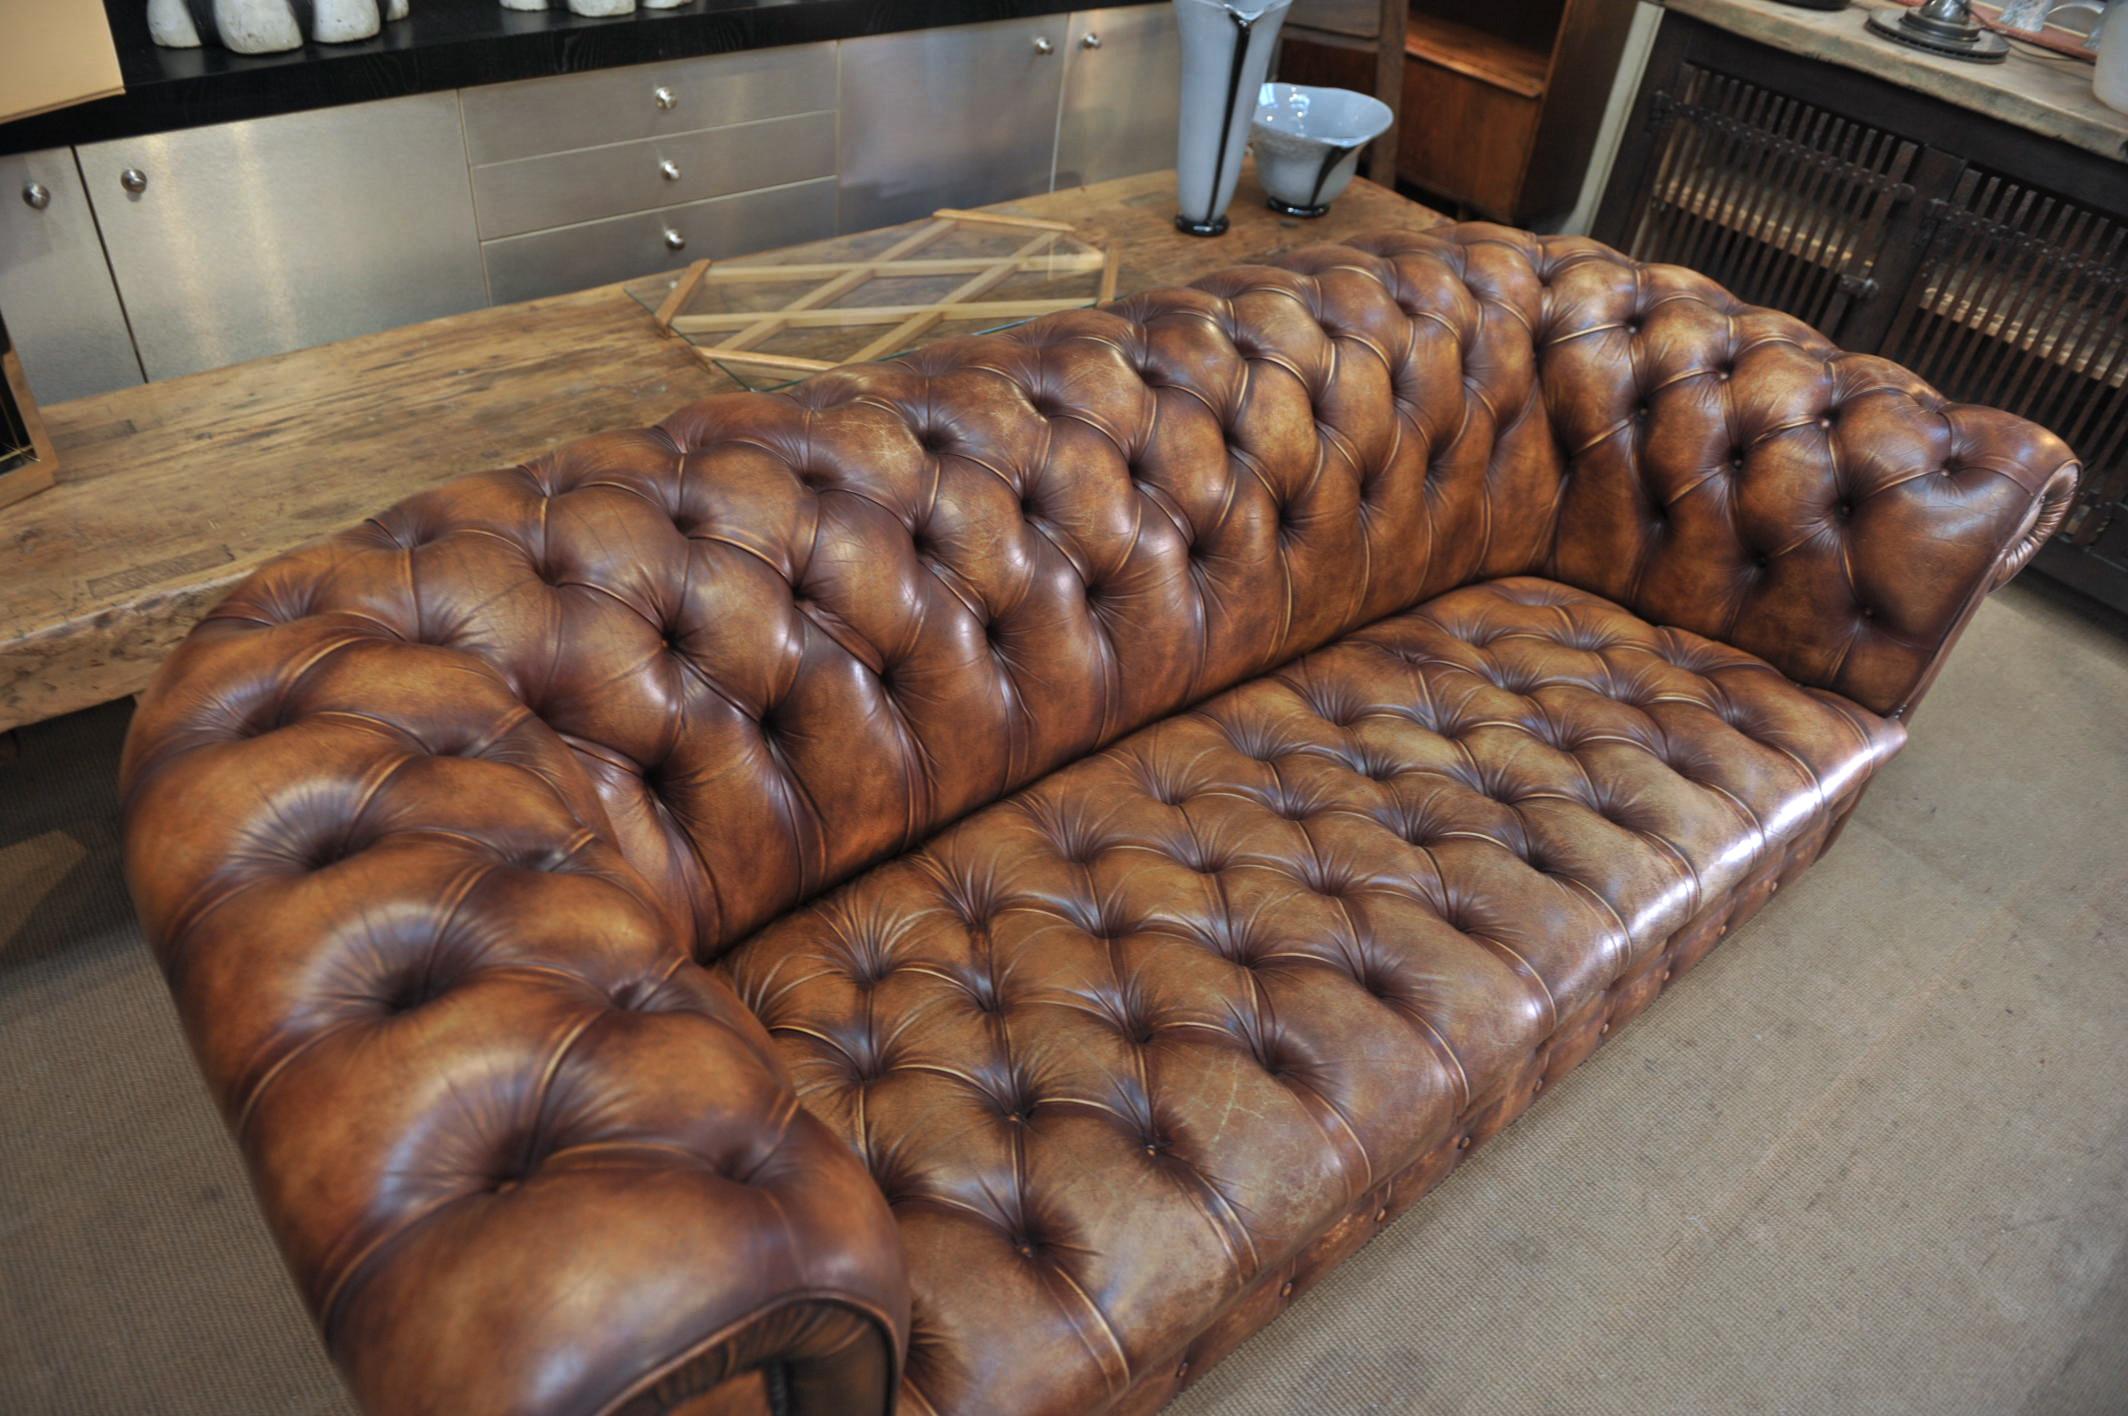 Leather Chesterfield Sofa circa 1970 from 